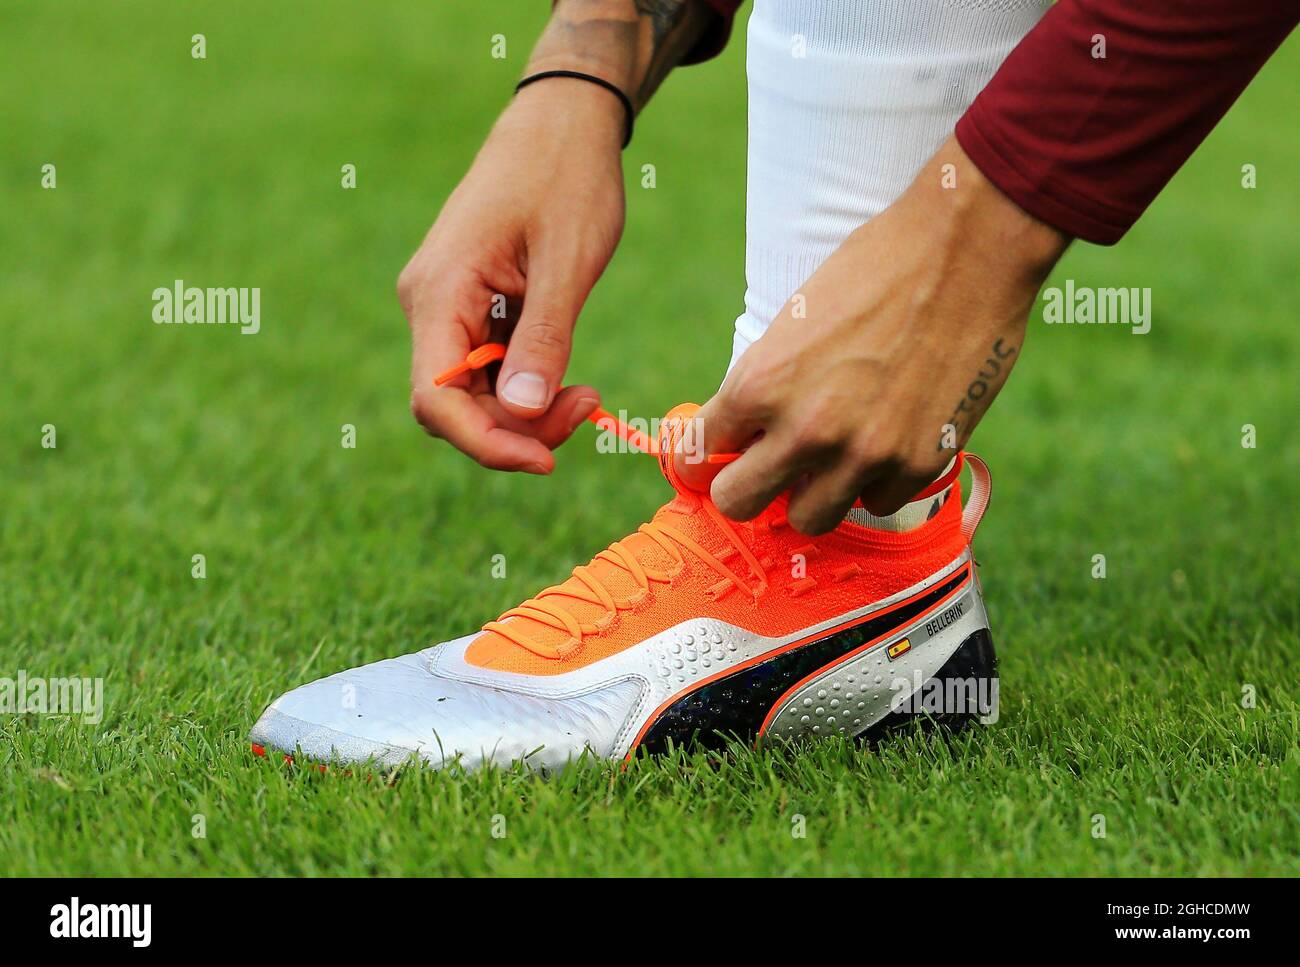 Arsenal's Hector Bellerin ties his personalised Puma football boots during  the pre season friendly match at the Aviva Stadium, Dublin. Picture date  1st August 2018. Picture credit should read: Matt McNulty/Sportimage via